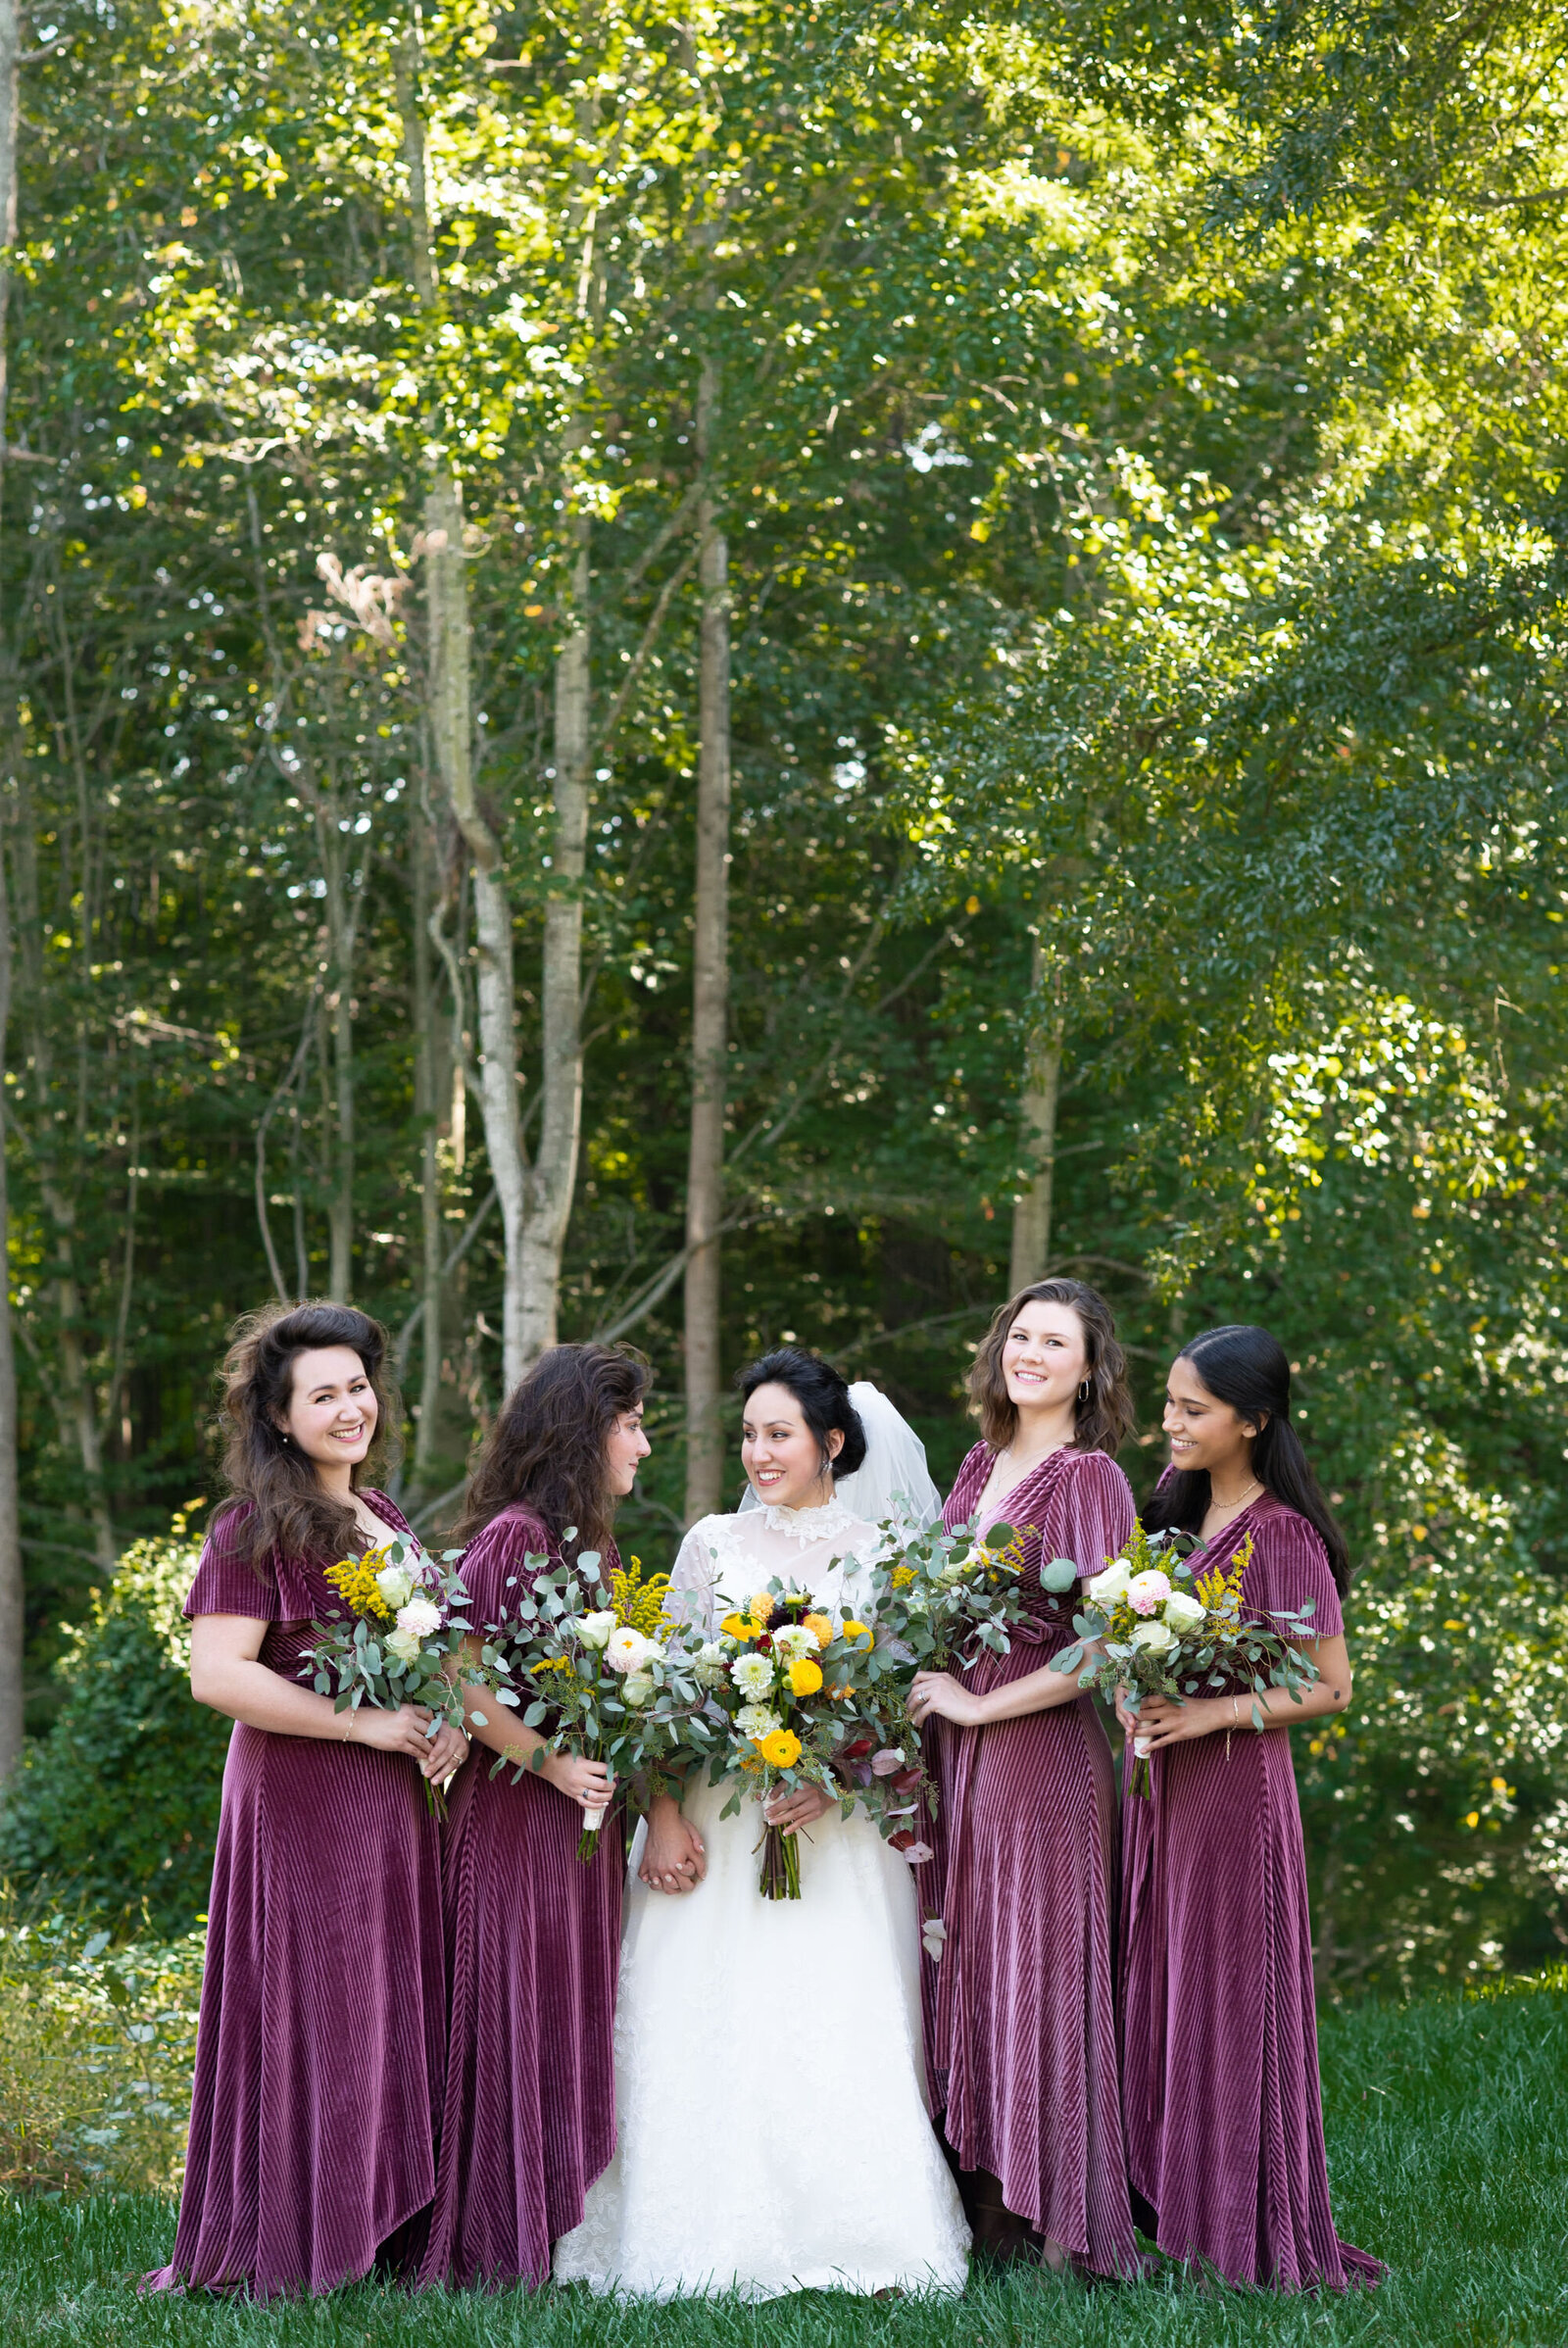 A bride stands with her bridesmaids in a field.